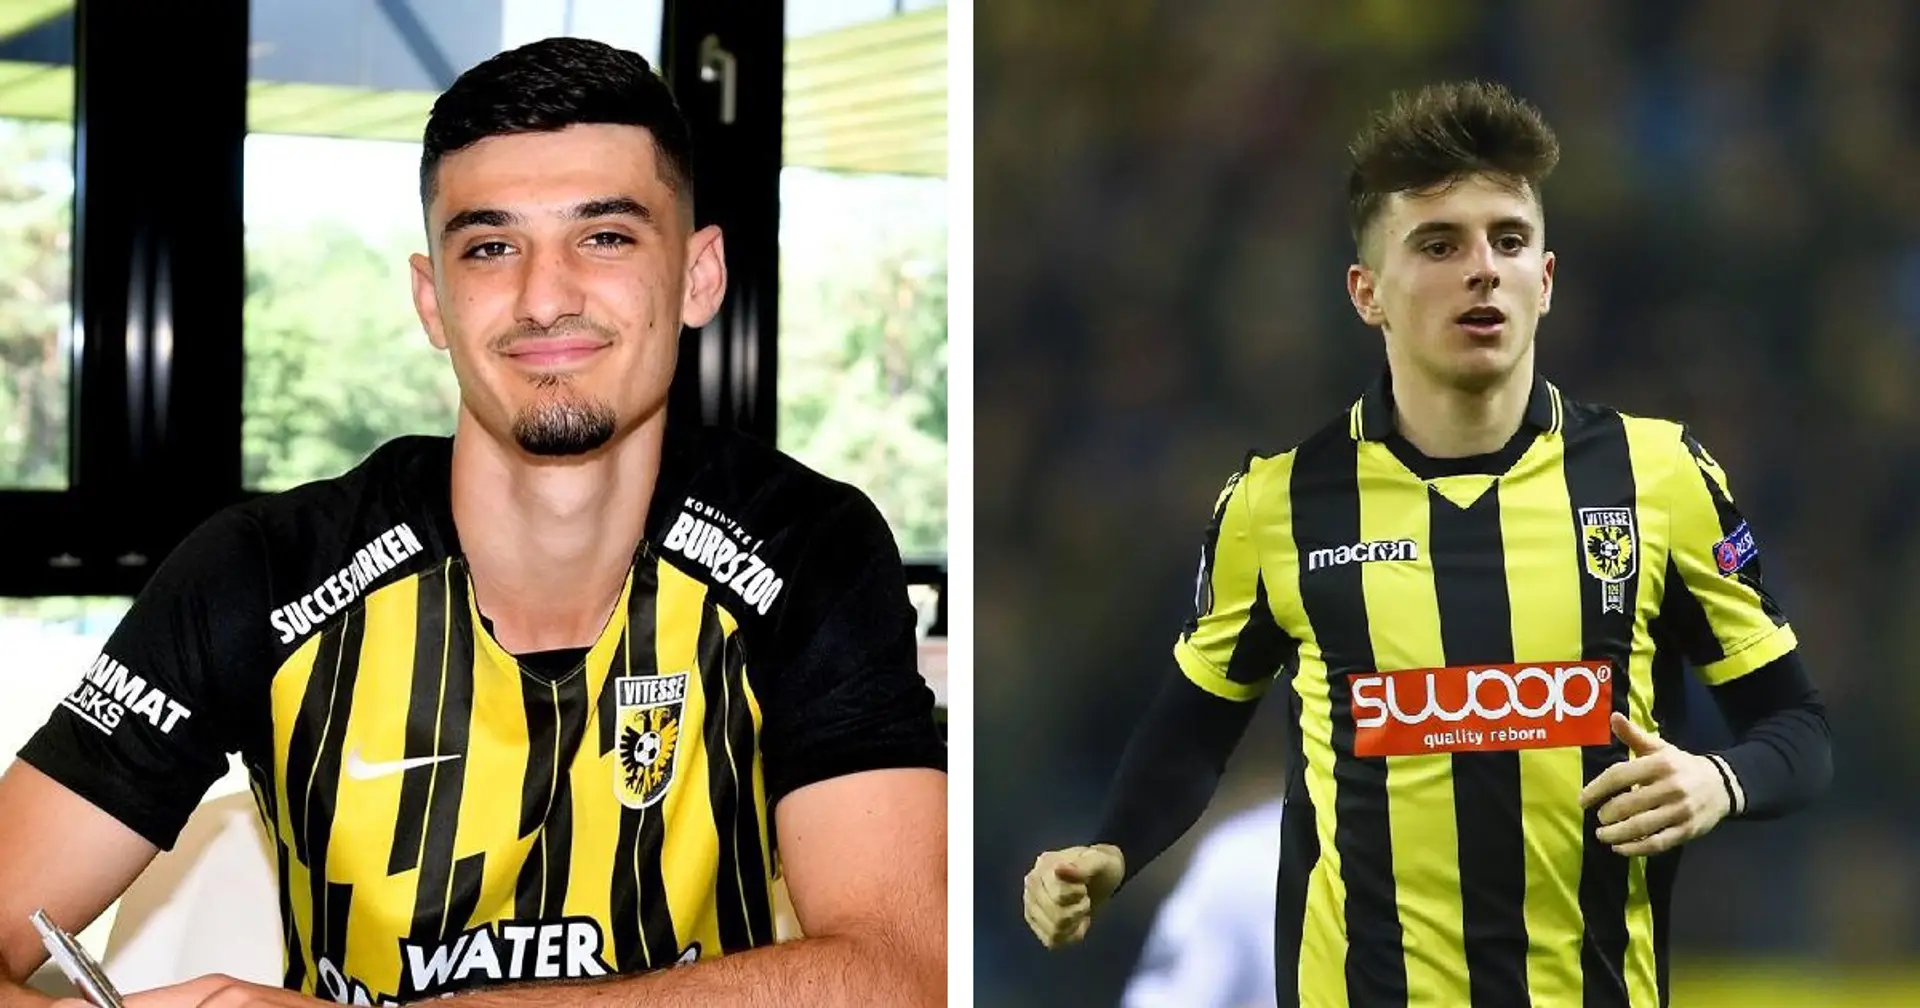 I want to follow Mount's path: Chelsea attacker Broja details ambitions after Vitesse move